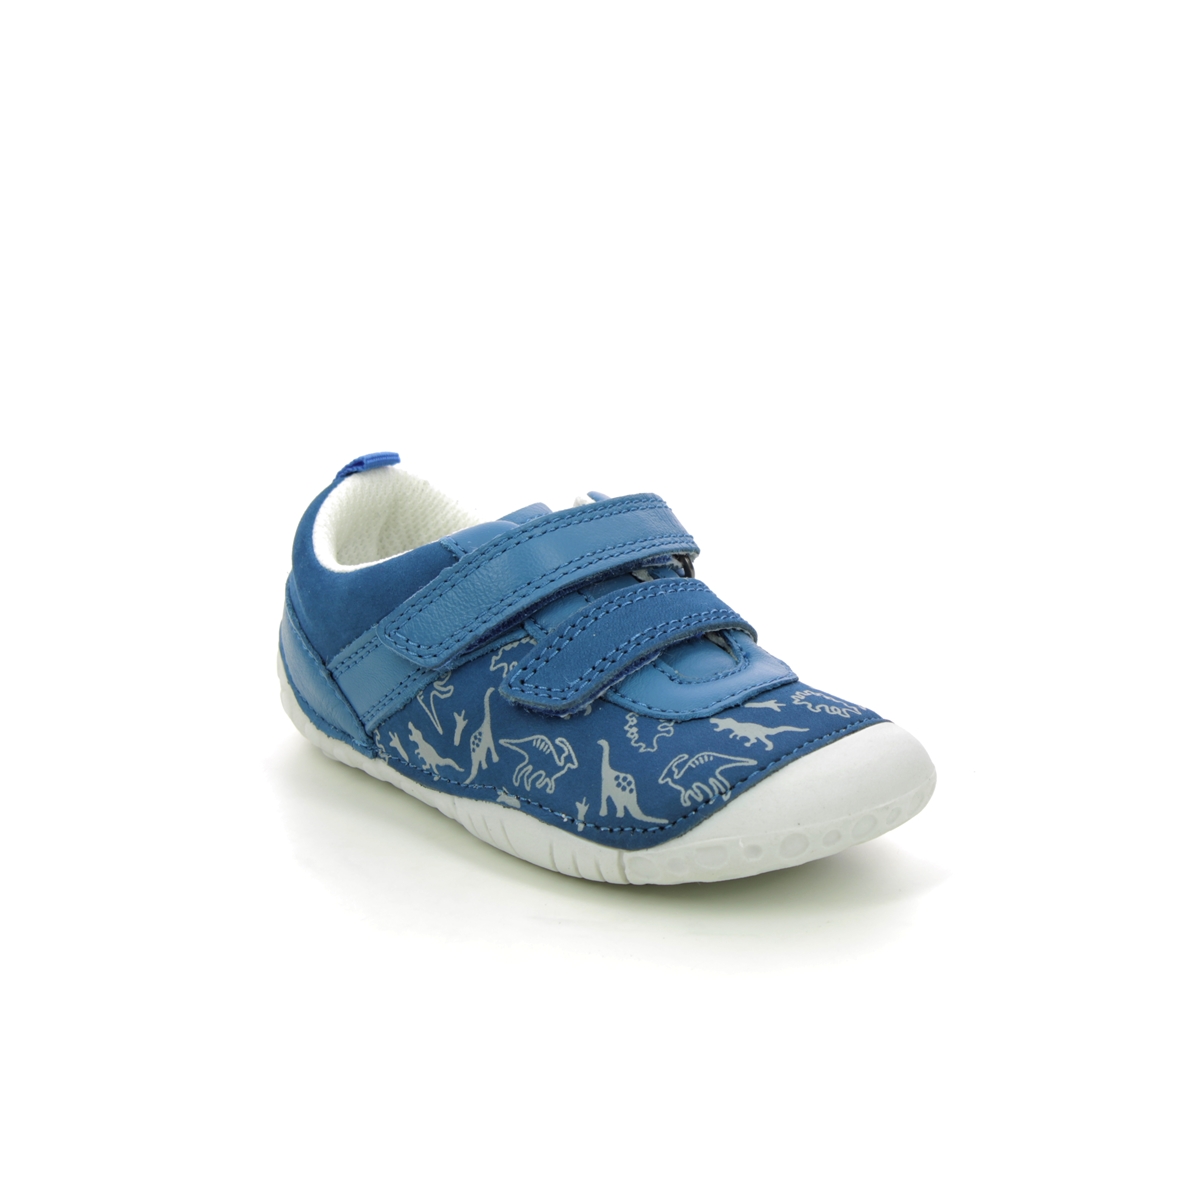 Start Rite - Roar 2V In Blue Nubuck 0767-26F In Size 5 In Plain Blue Nubuck Boys First And Toddler Shoes  In Blue Nubuck For kids